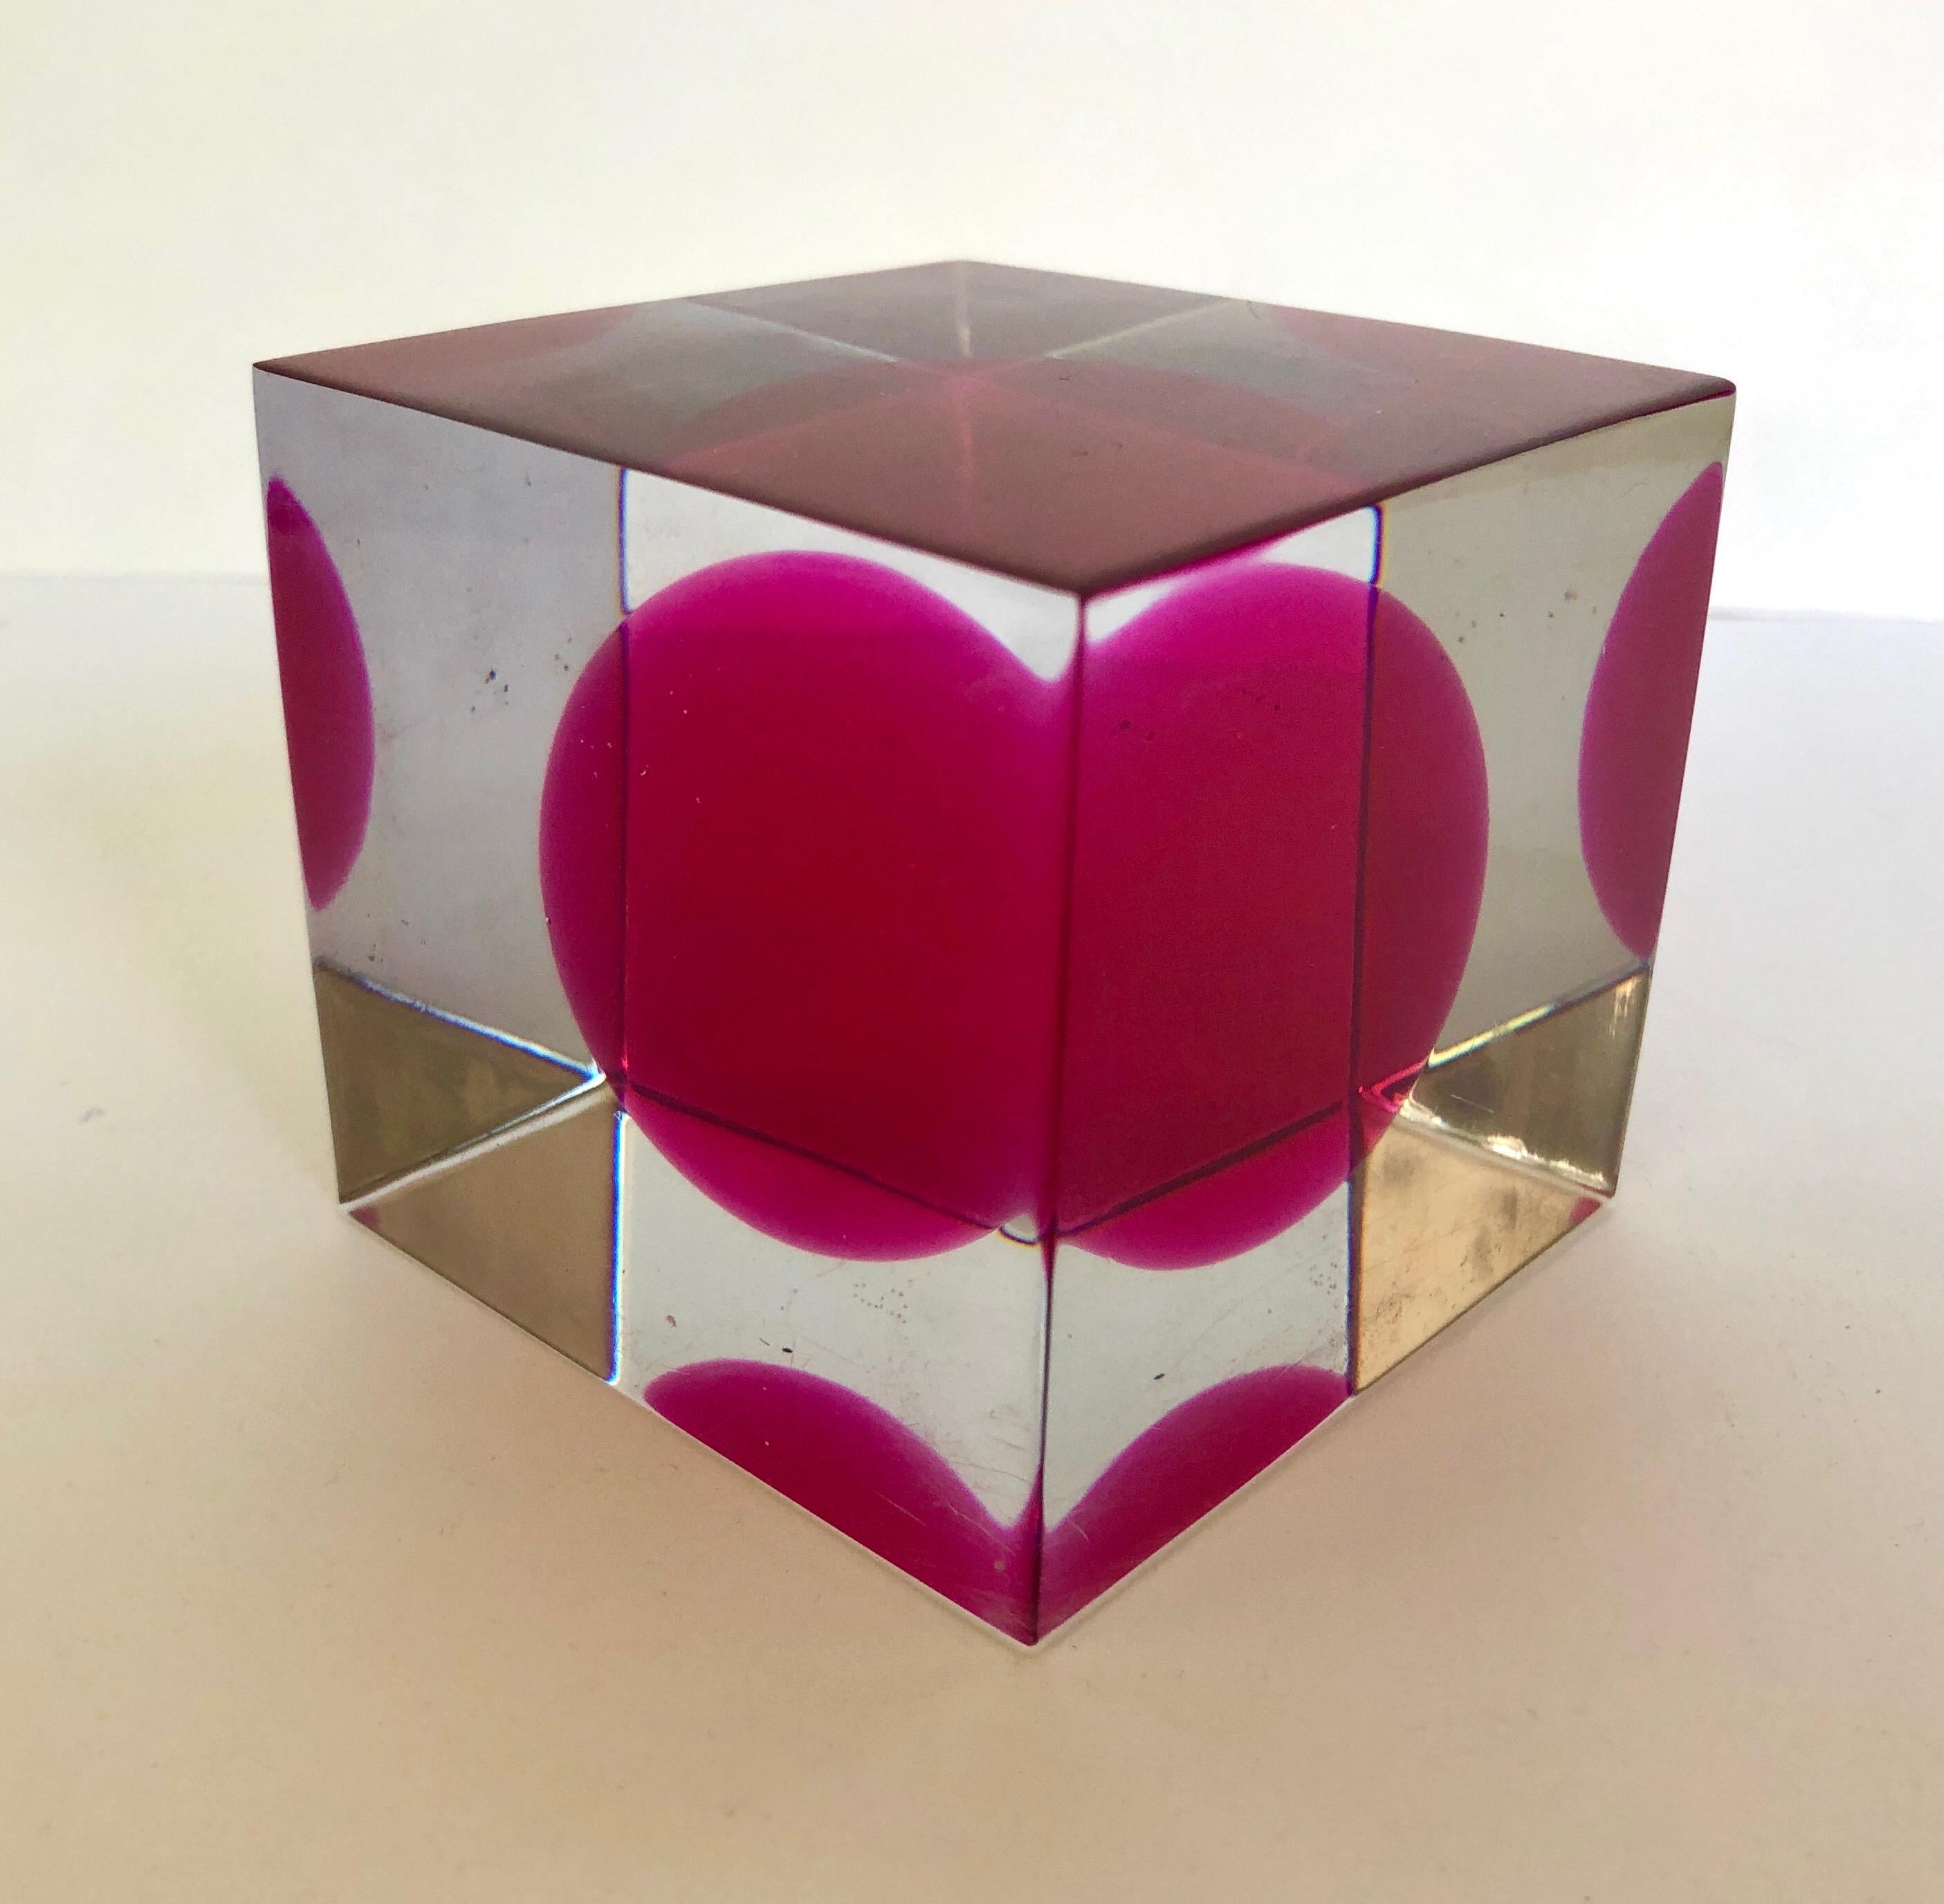 Lucite cube with internal red sphere.